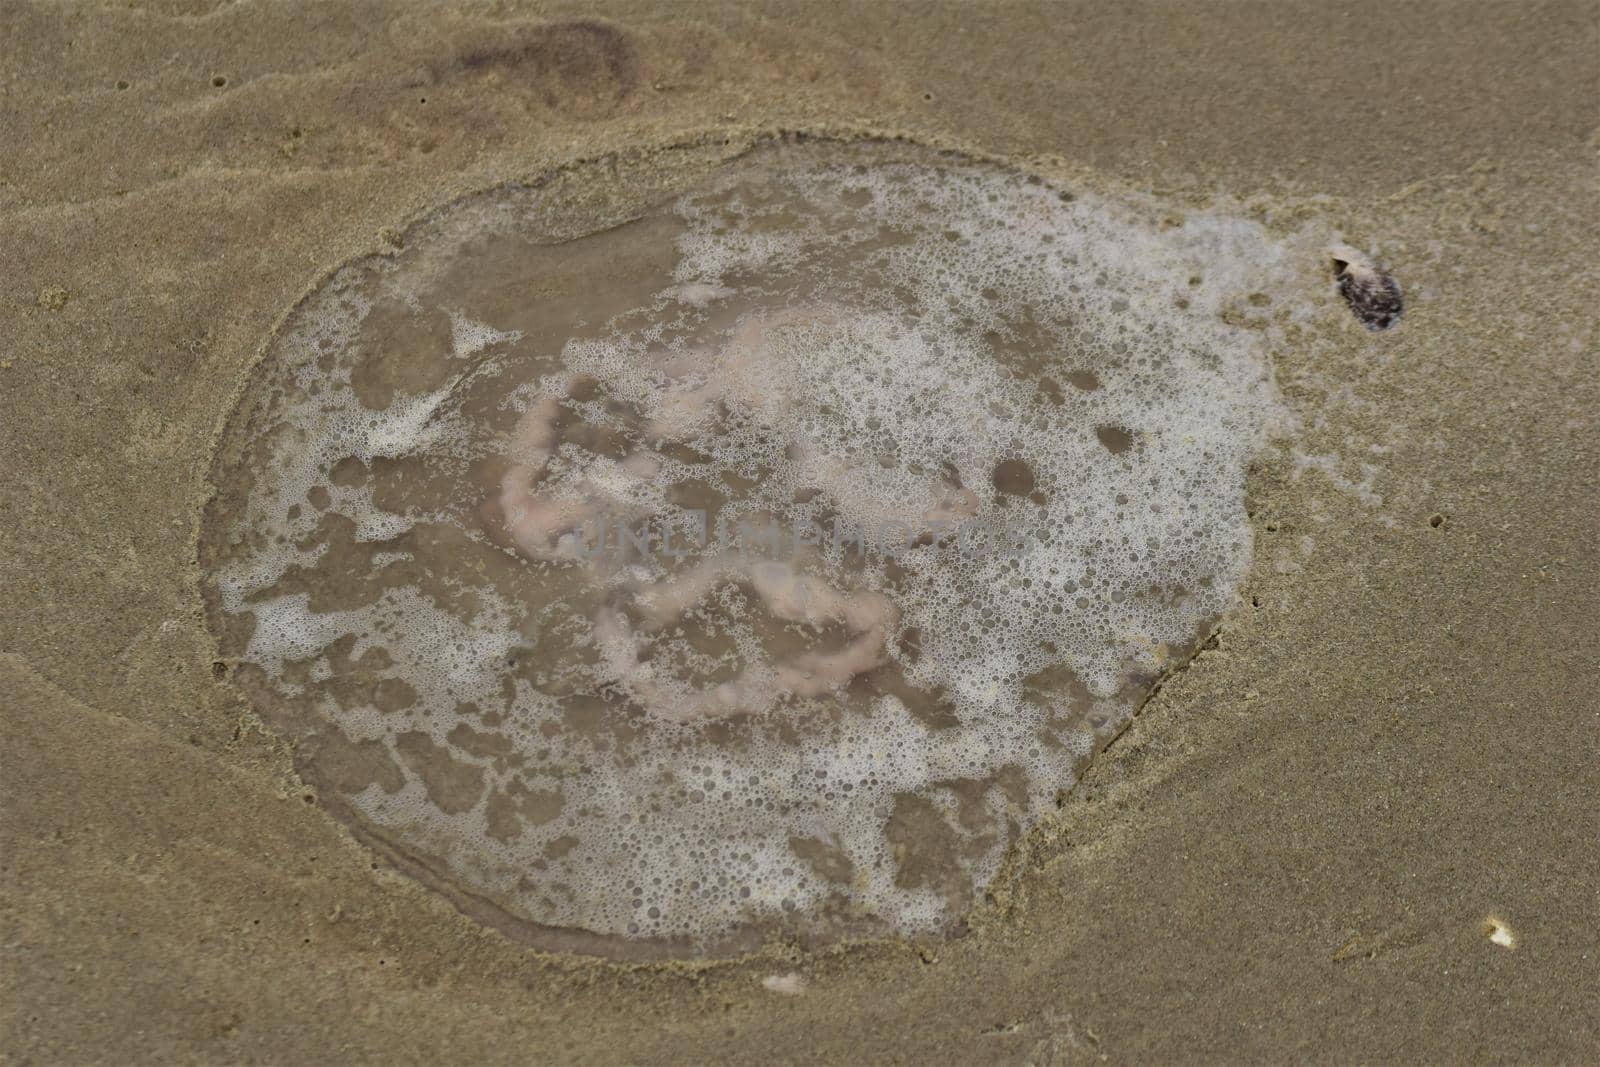 Close-up of a jellyfish on the beach